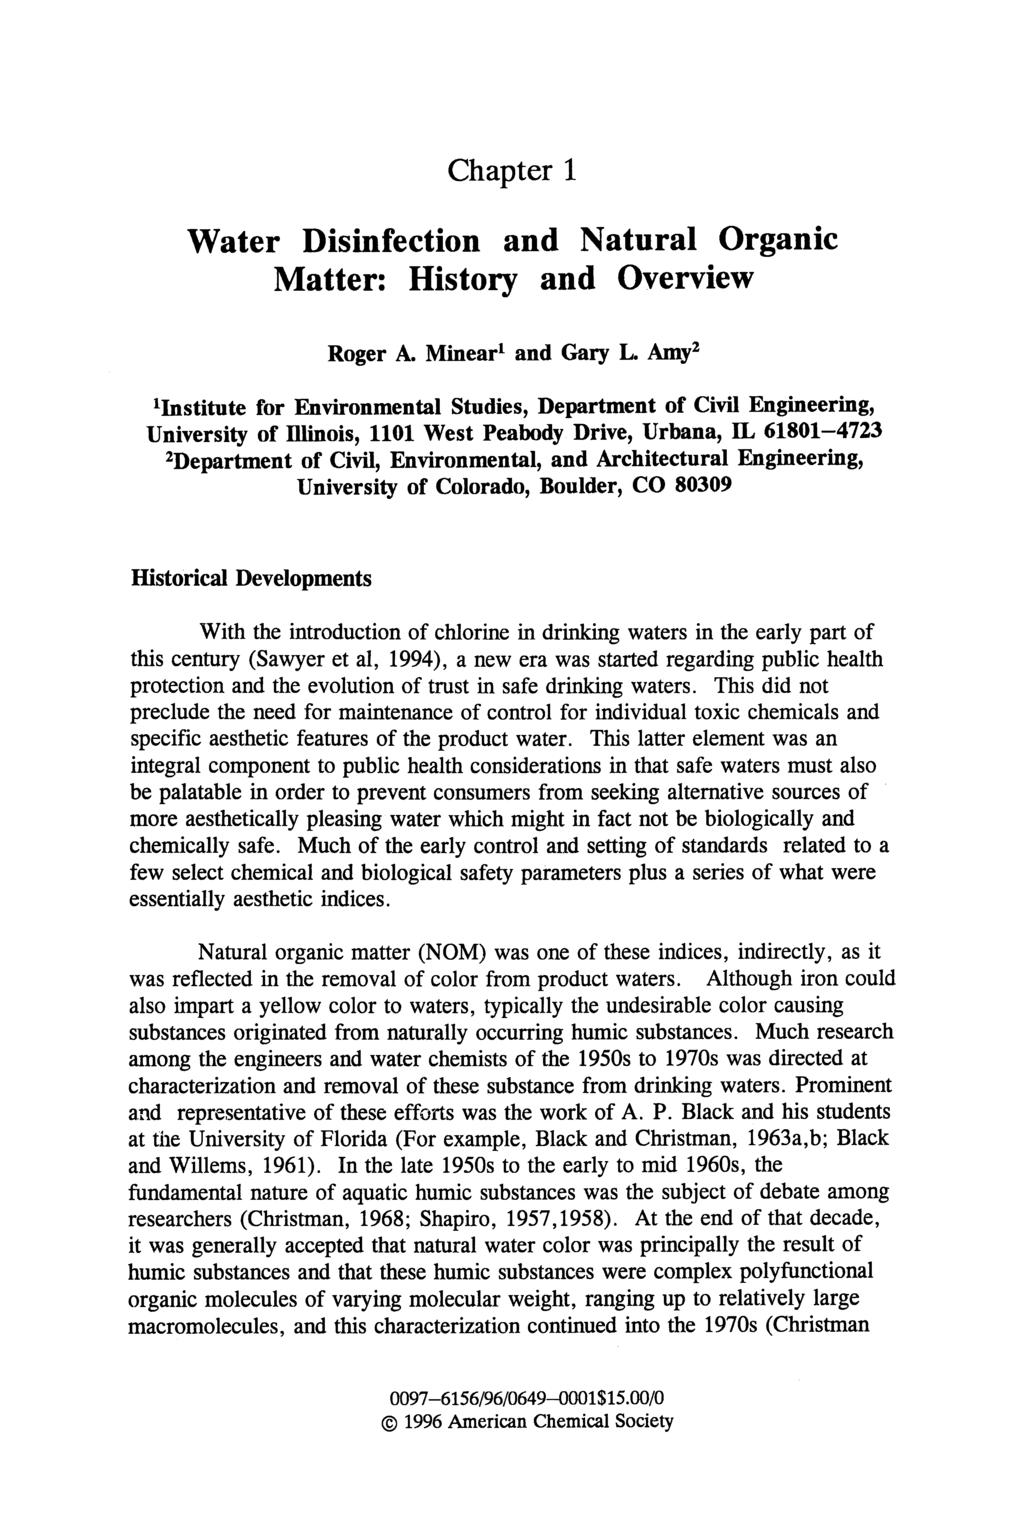 Chapter 1 Water Disinfection and Natural Organic Matter: History and Overview Roger A. Minear 1 and Gary L. Amy 2 Downloaded via 148.251.232.83 on September 24, 2018 at 22:15:14 (UTC).